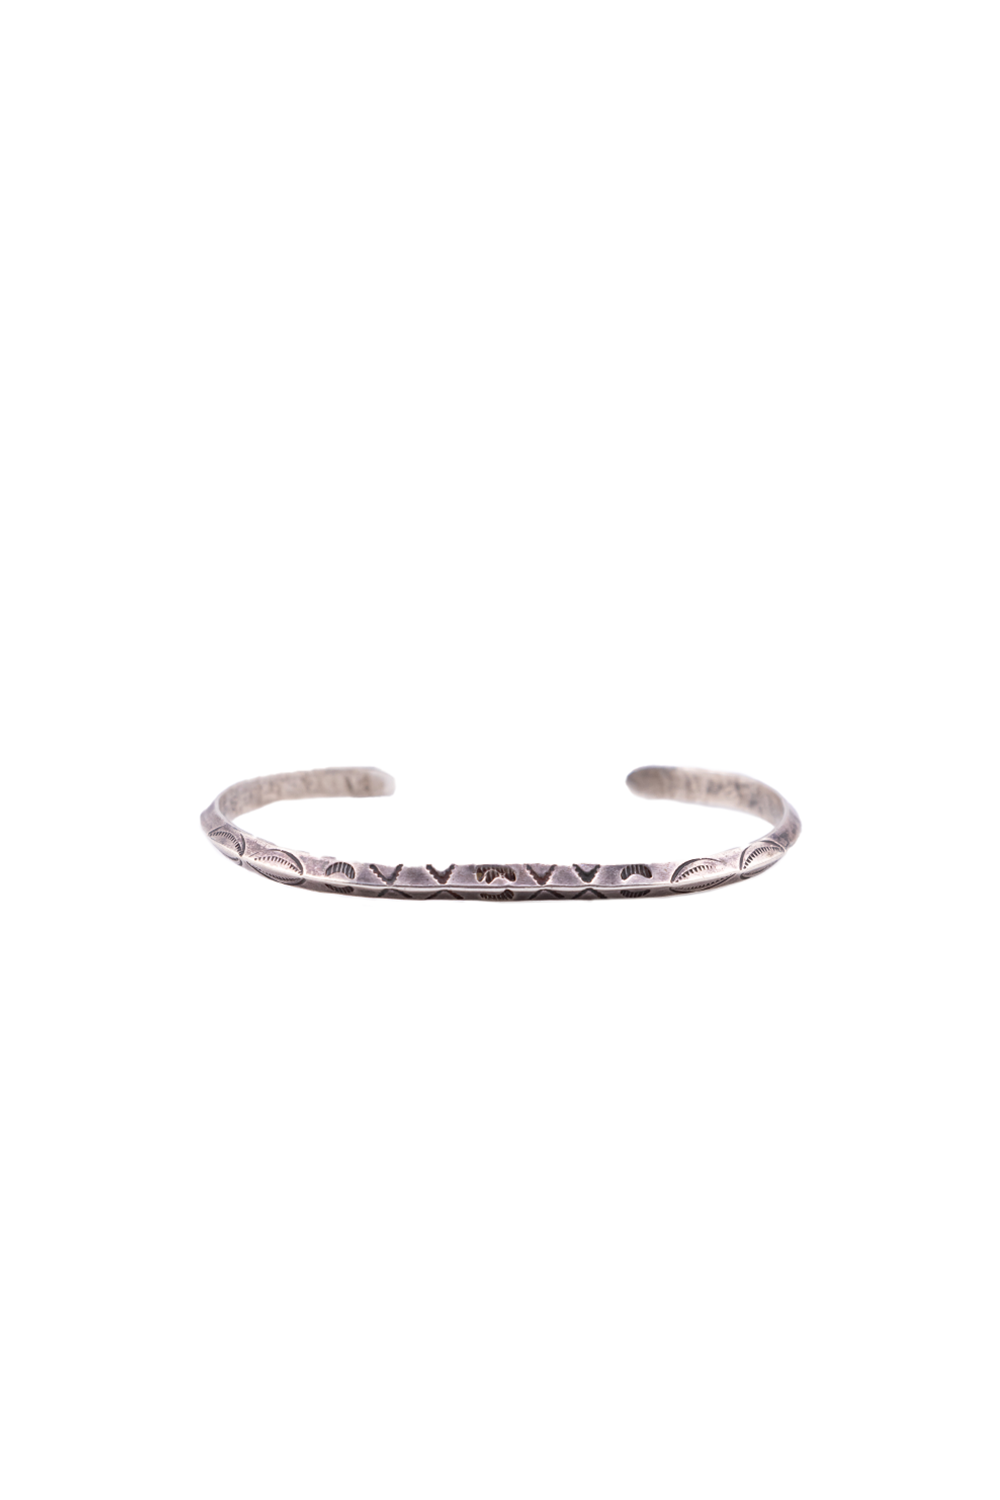 Old Sterling Silver Hand Stamped Cuff Bracelet